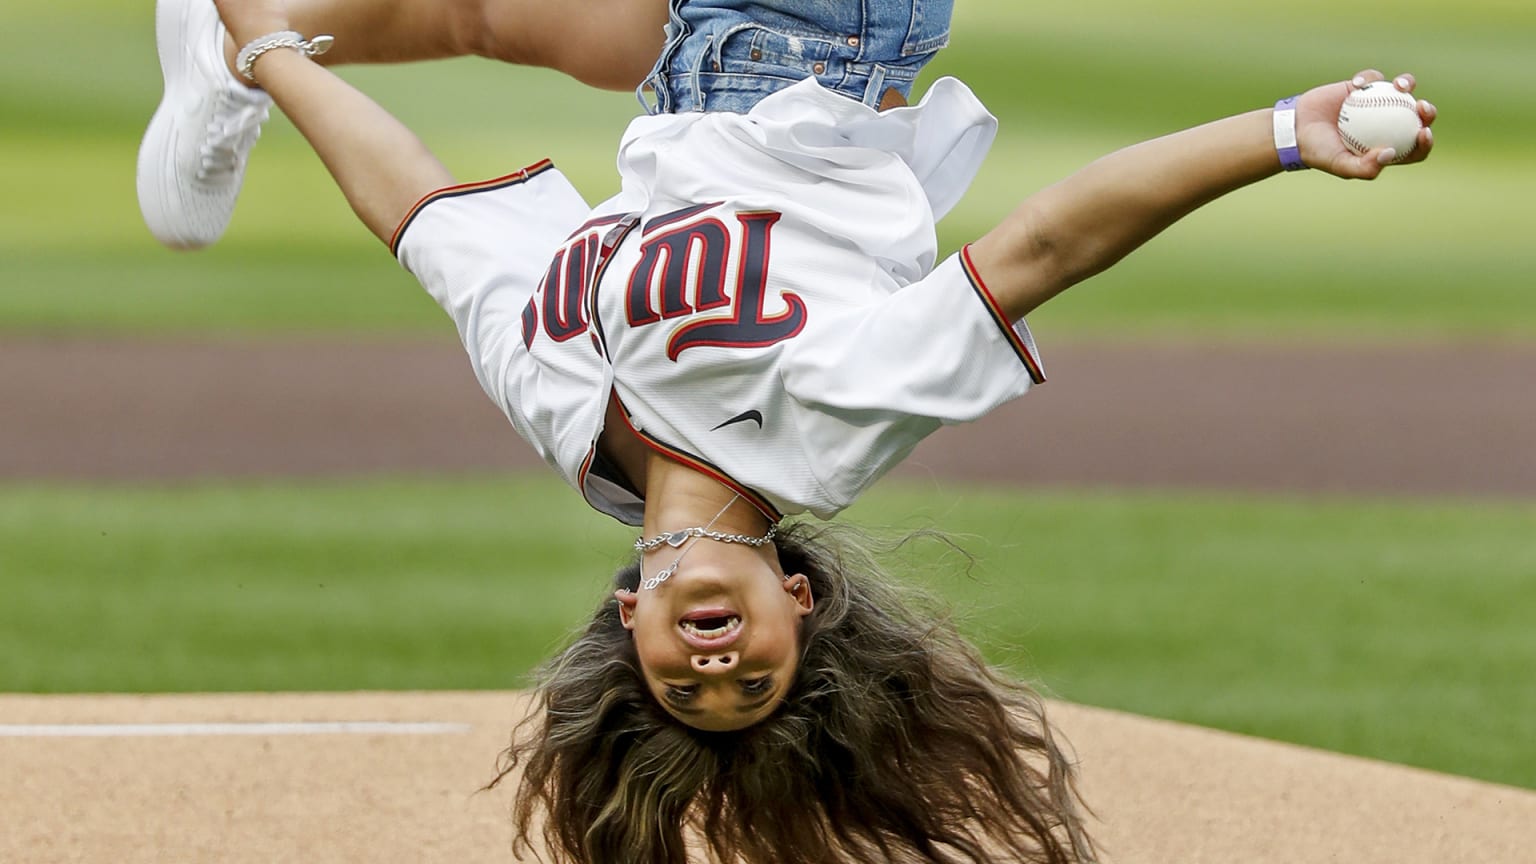 A woman in a Twins jersey upside-down, mid-flip, with a baseball in her right hand